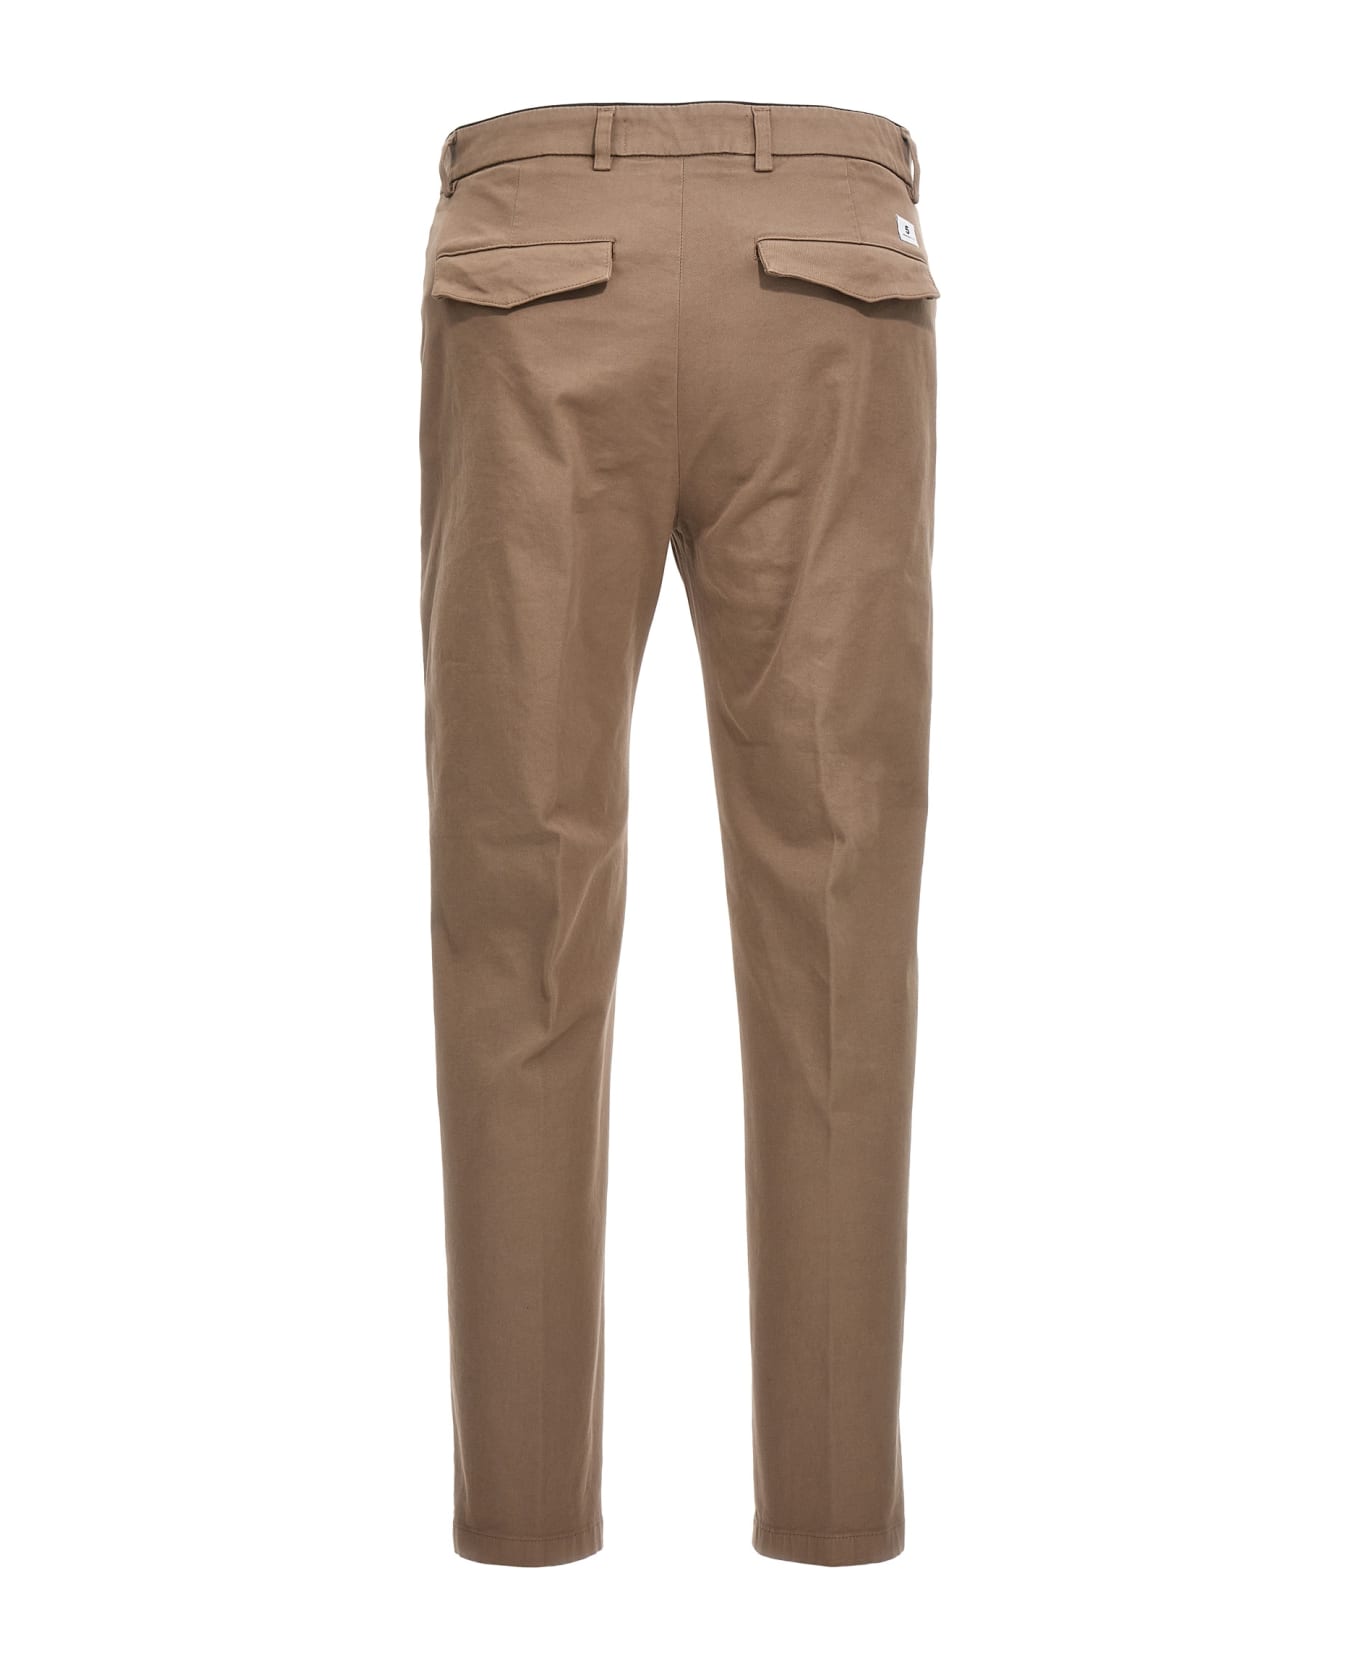 Department Five Prince' Pants - Beige ボトムス